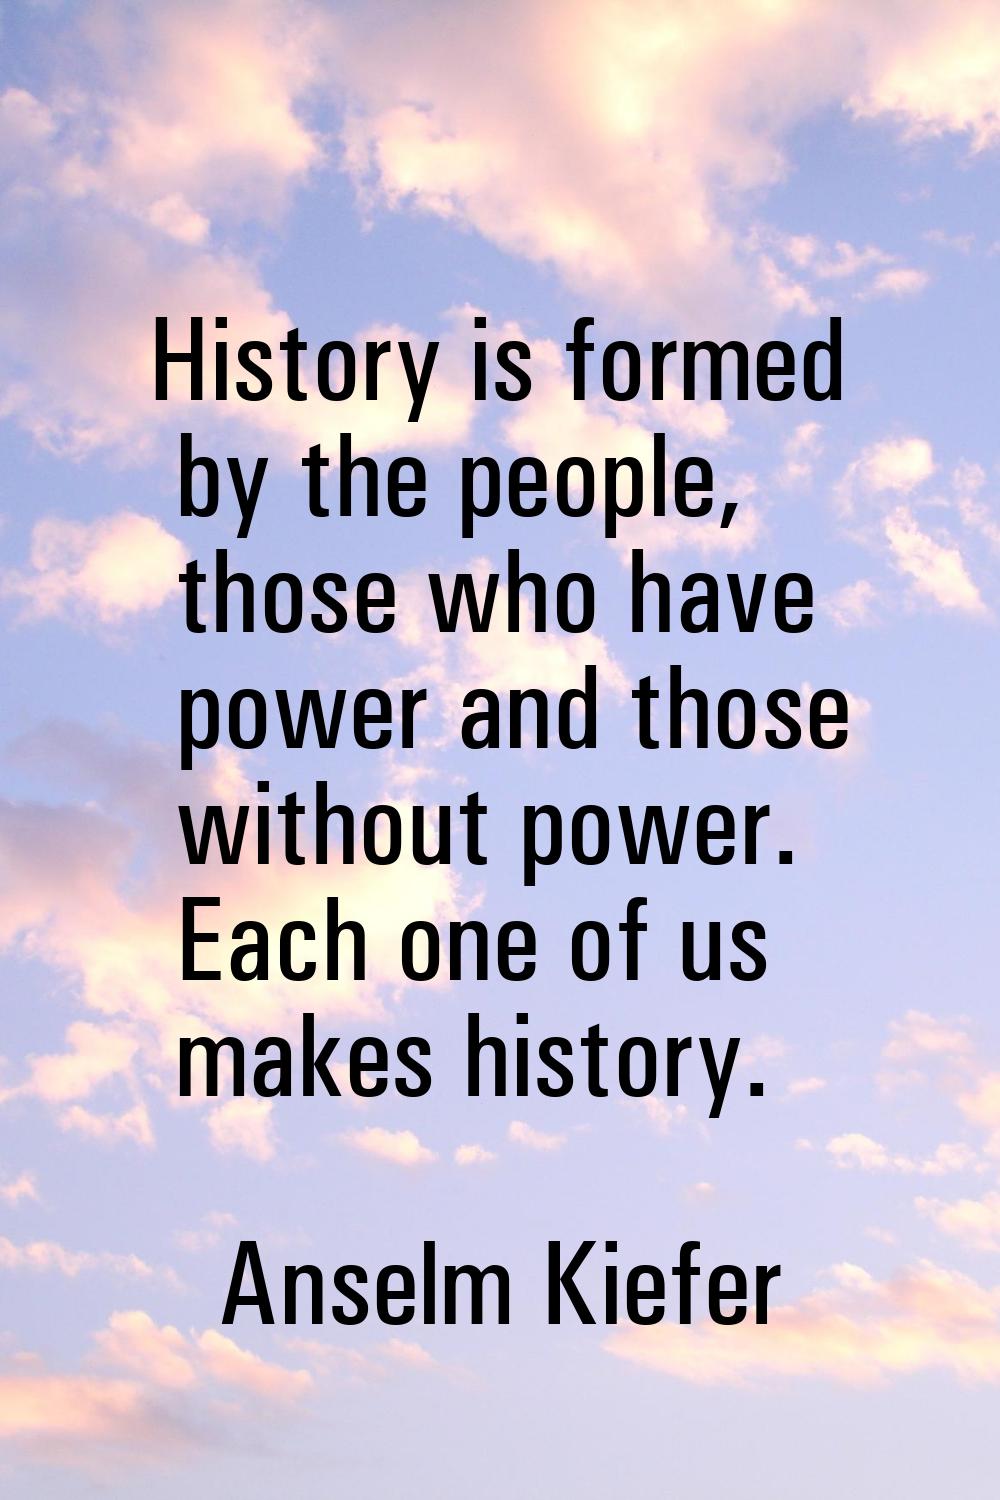 History is formed by the people, those who have power and those without power. Each one of us makes